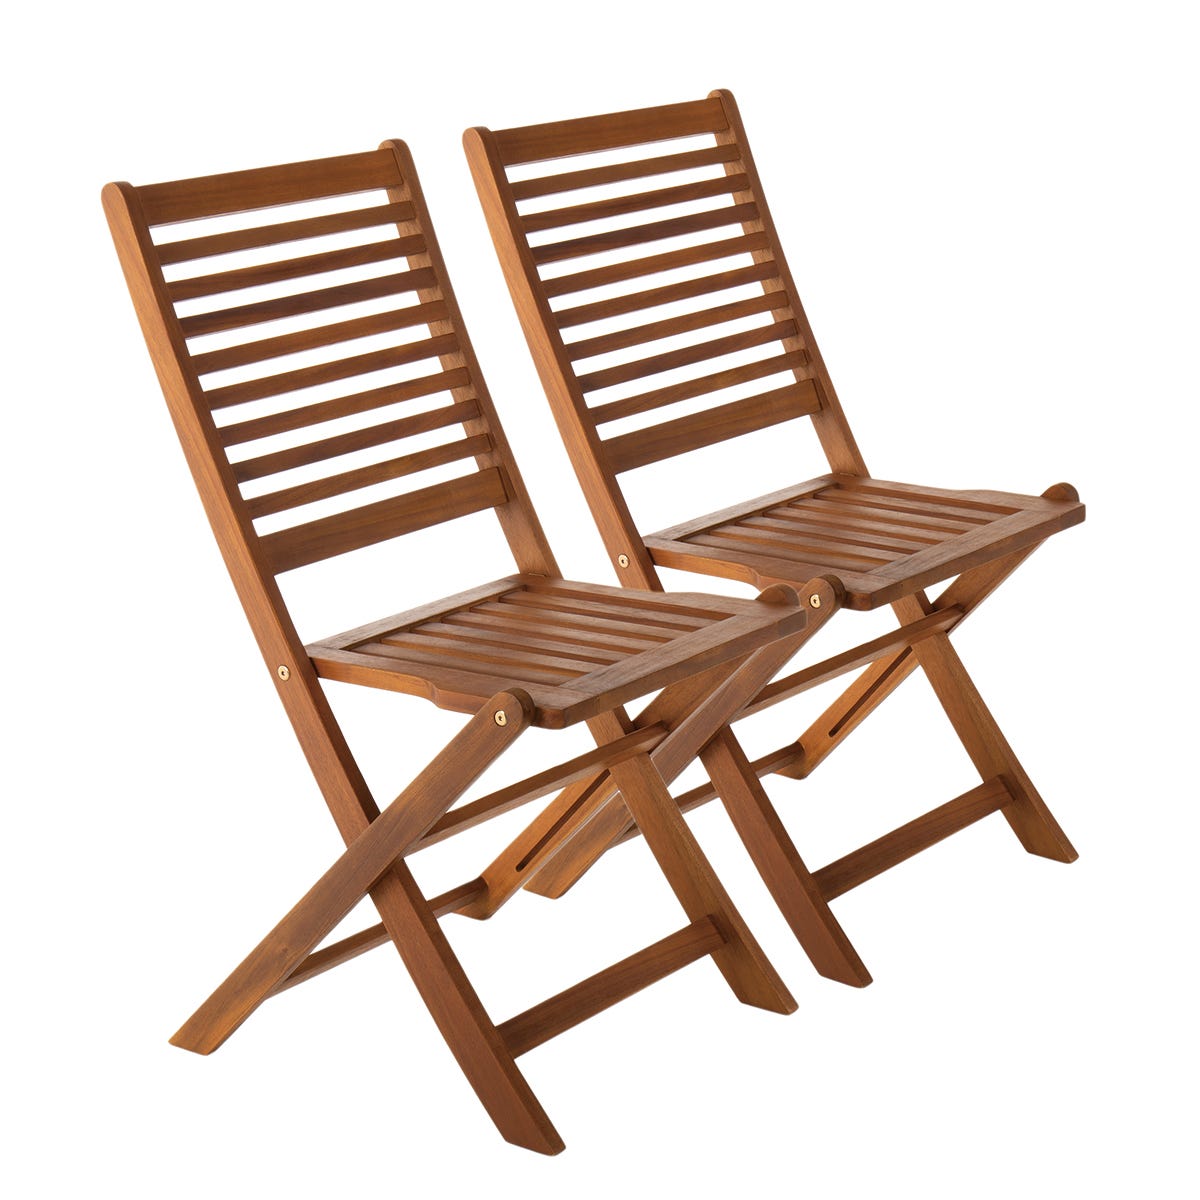 Charles Bentley Fsc Acacia Wood Pair Of Outdoor Foldable Chairs